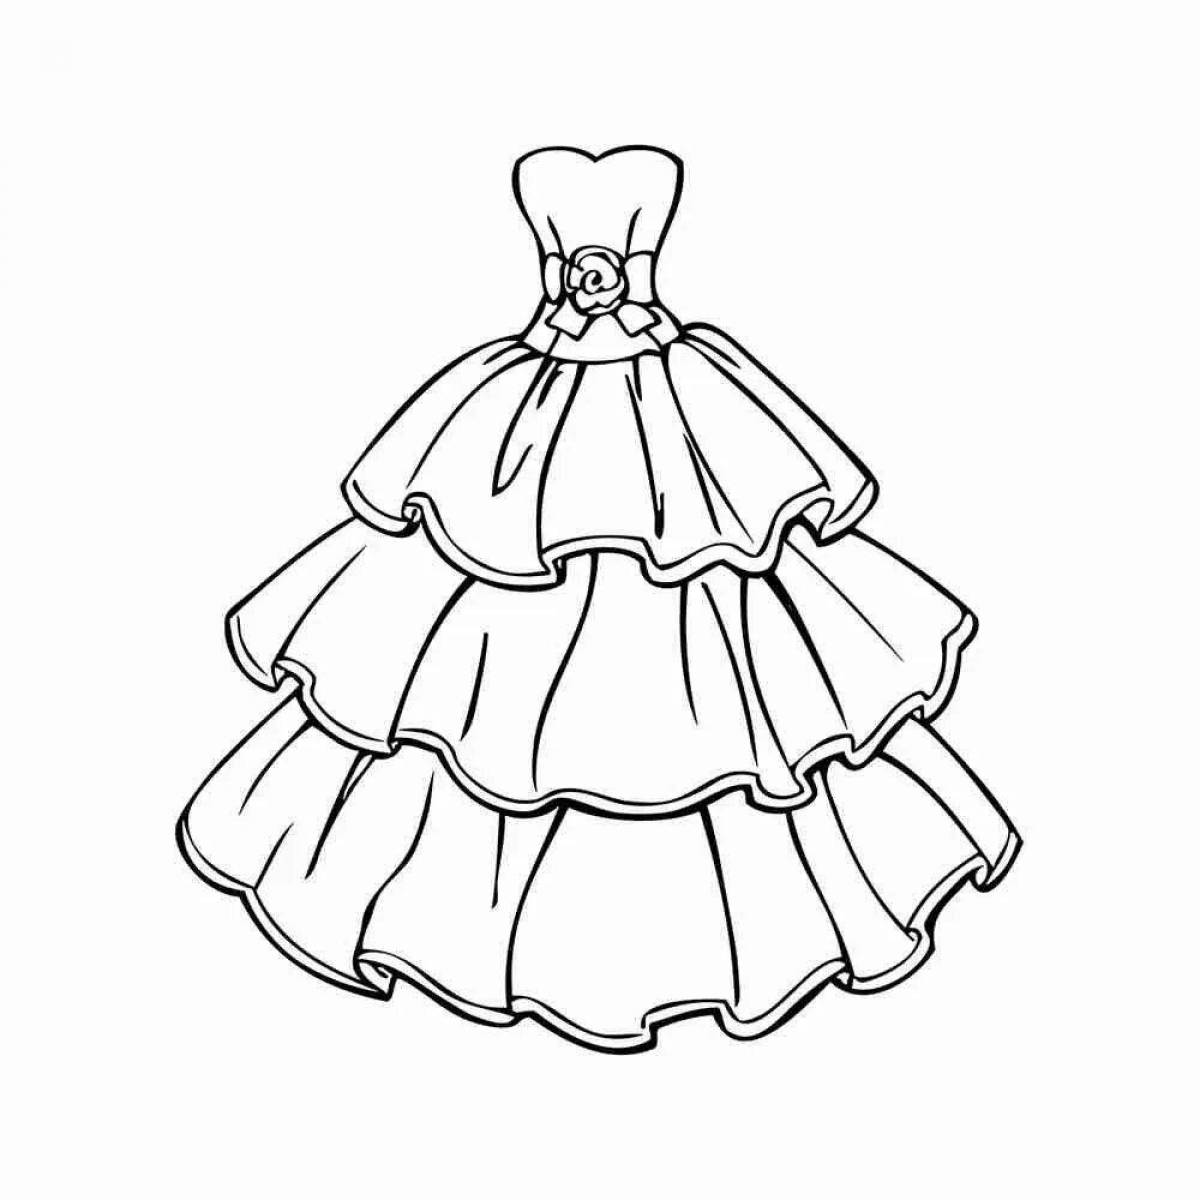 Coloring fairy dress with clothes